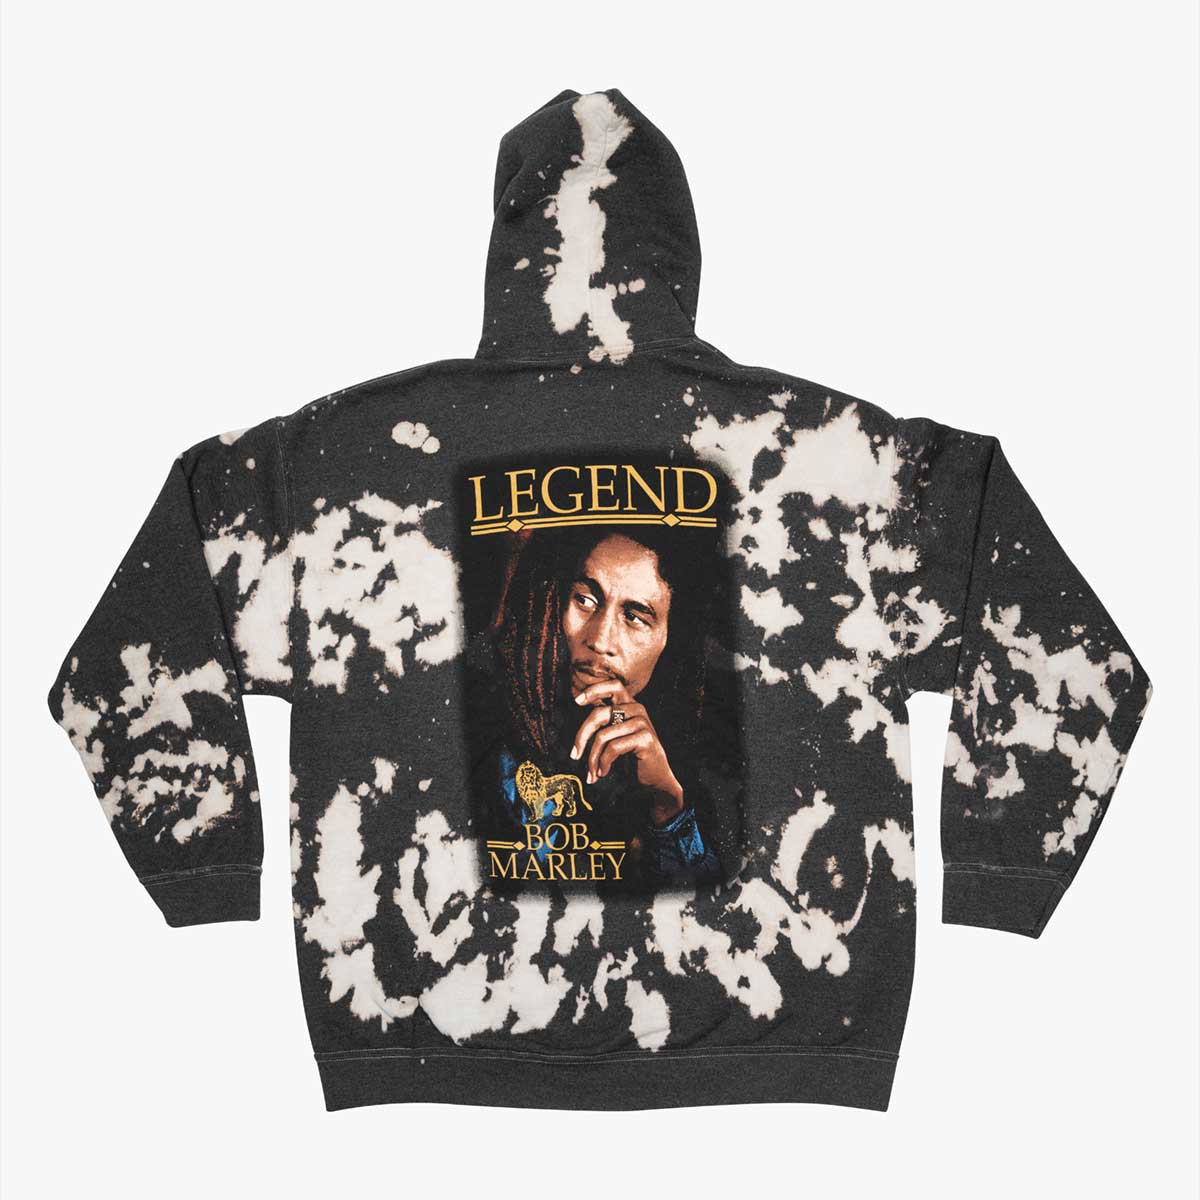 Bob Marley Adult Fit Hoodie with Bleach Effect Design image number 1